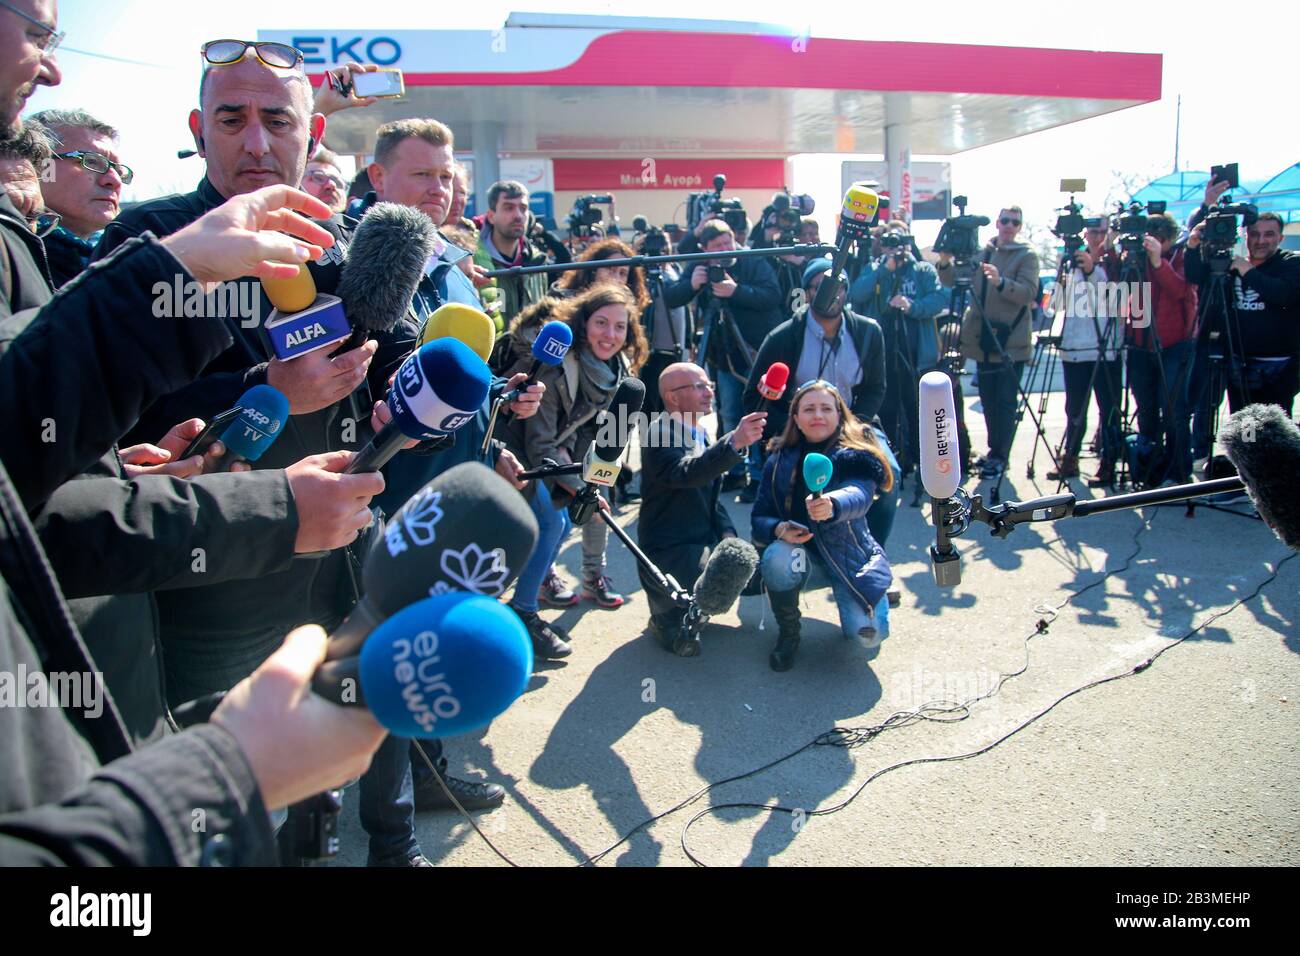 Kastanies, Evros, Greece - March 1, 2020: journalists, television crews and photojournalism from all over the world have gathered at the Greek-Turkish Stock Photo